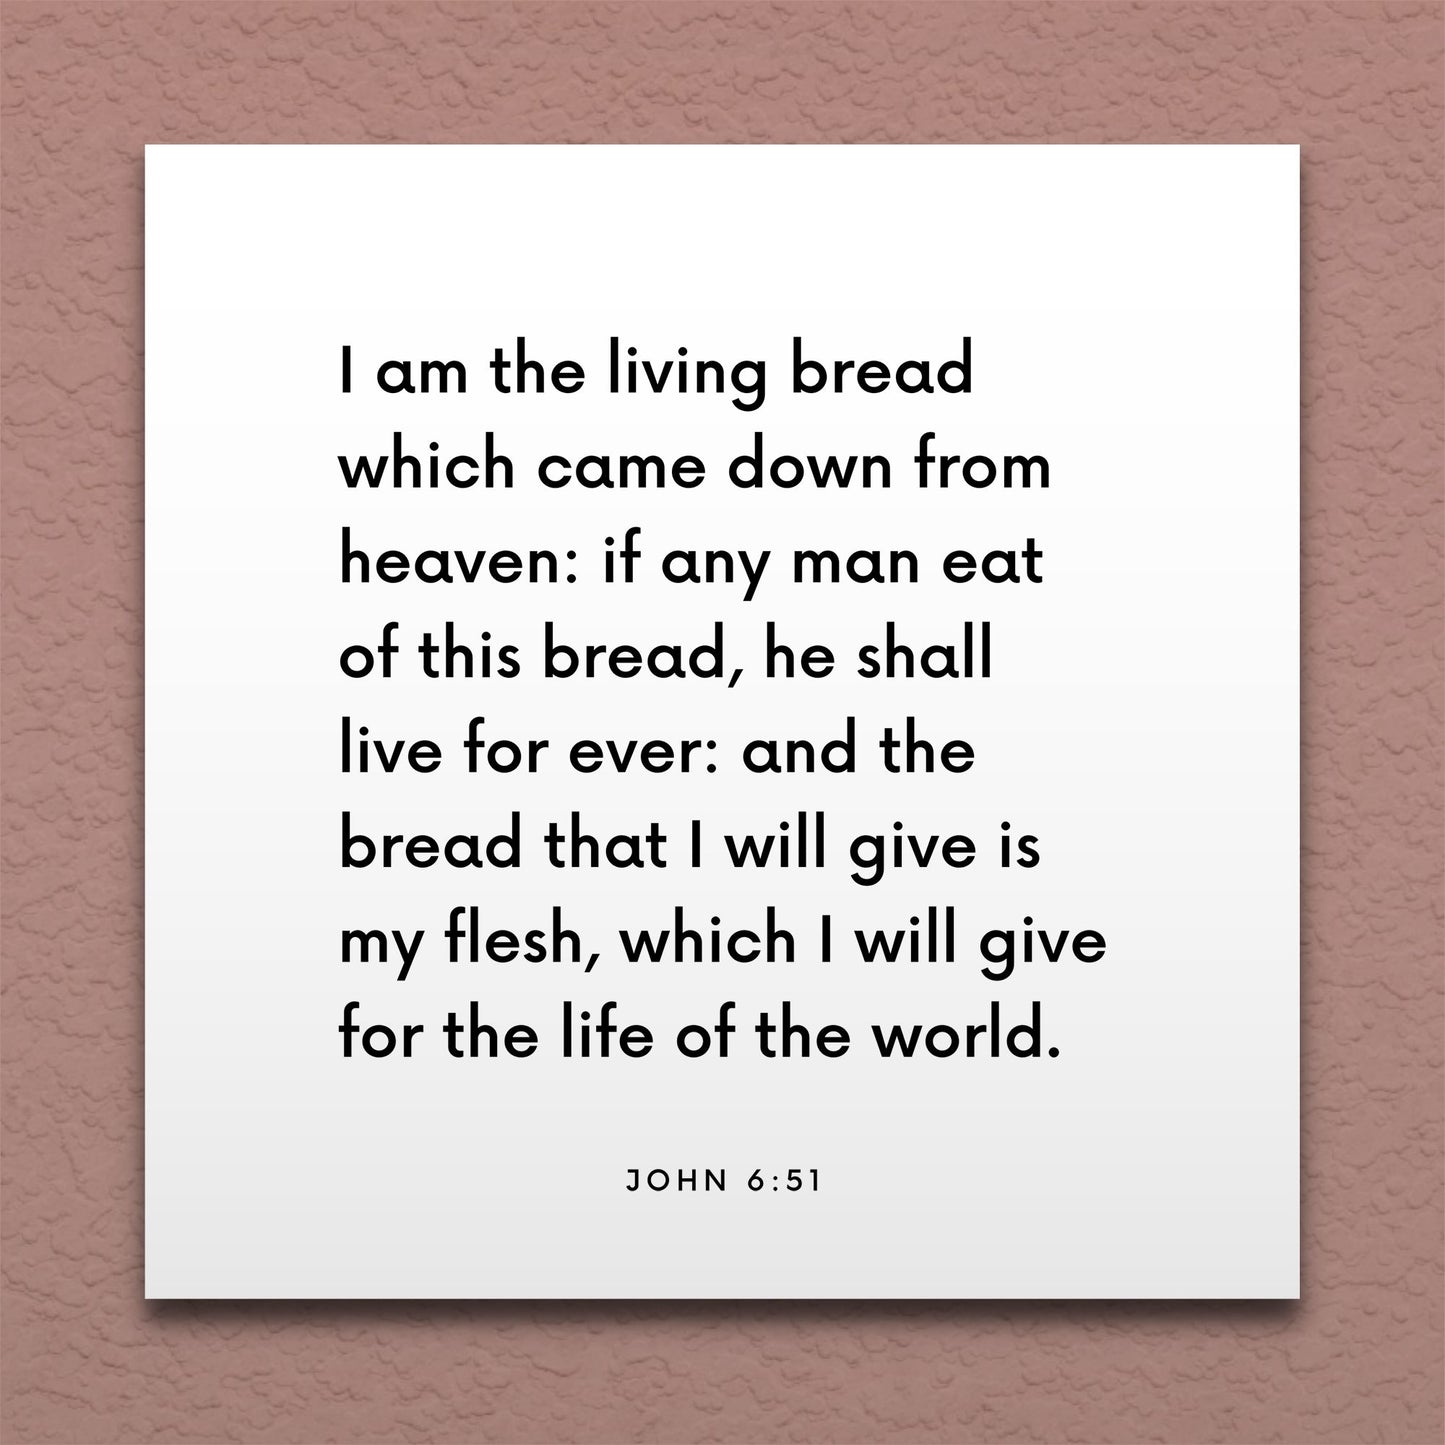 Wall-mounted scripture tile for John 6:51 - "The bread that I will give is my flesh"